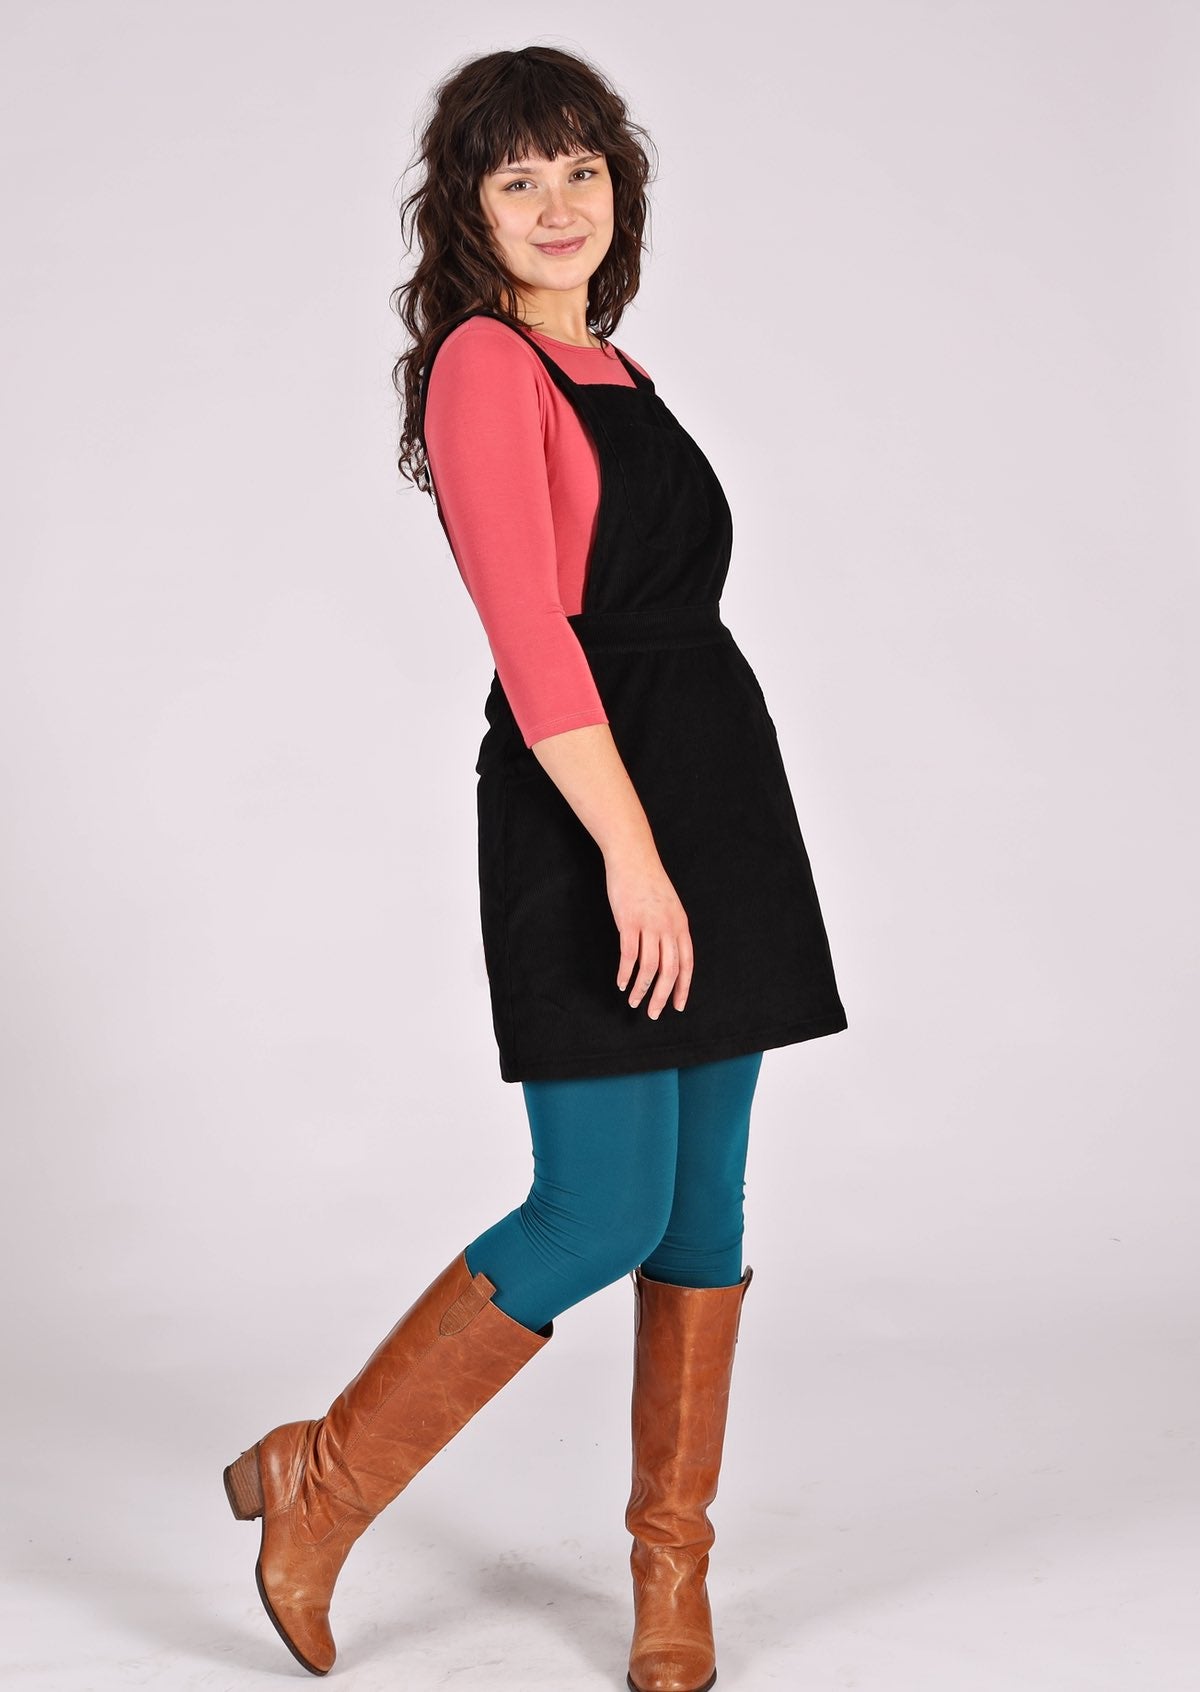 woman wearing black corduroy pinafore over pink top and teal leggings